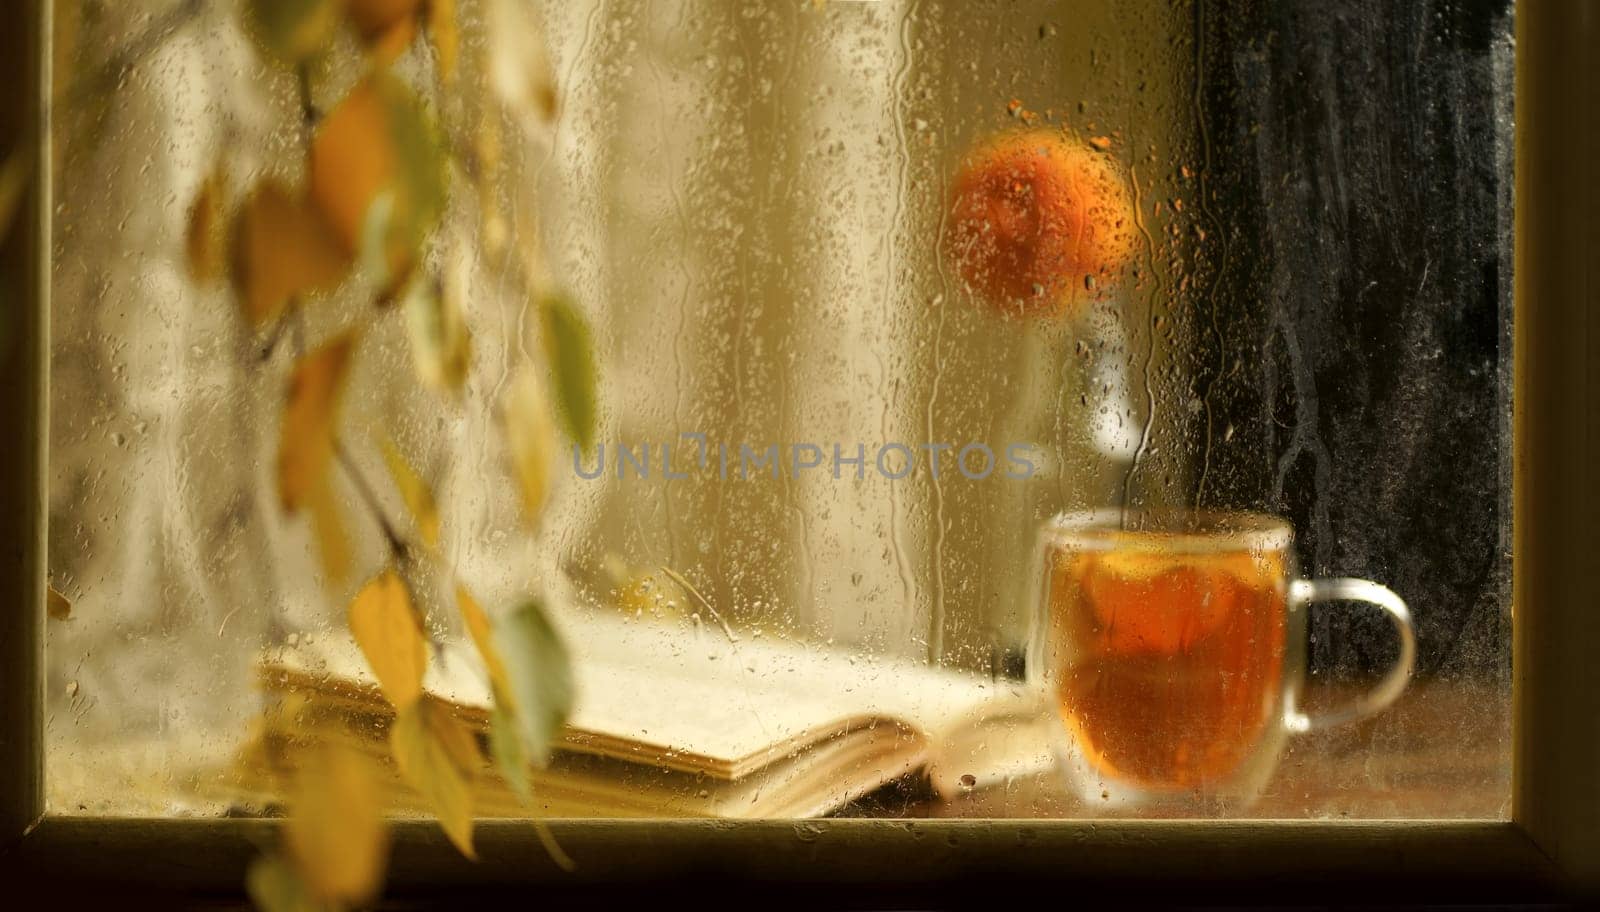 tea book autumn outside the window. a cup of fragrant tea with an open book on a wooden windowsill against the background of an autumn rainy window by aprilphoto